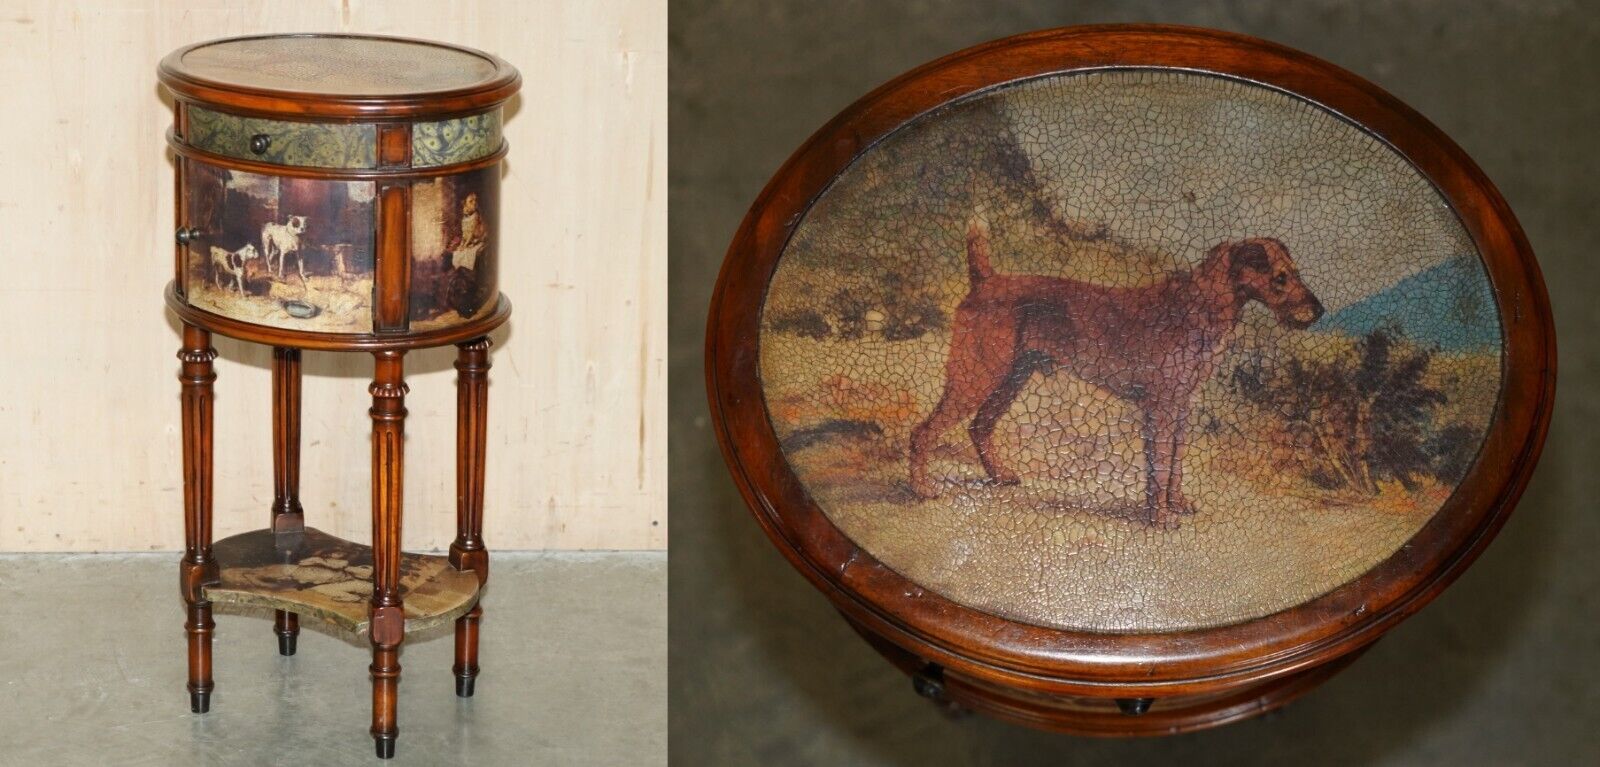 EXQUISITE TWO TIER TALL SIDE TABLE CABINET LEATHER CLADDED & PAINTED WITH DOGS